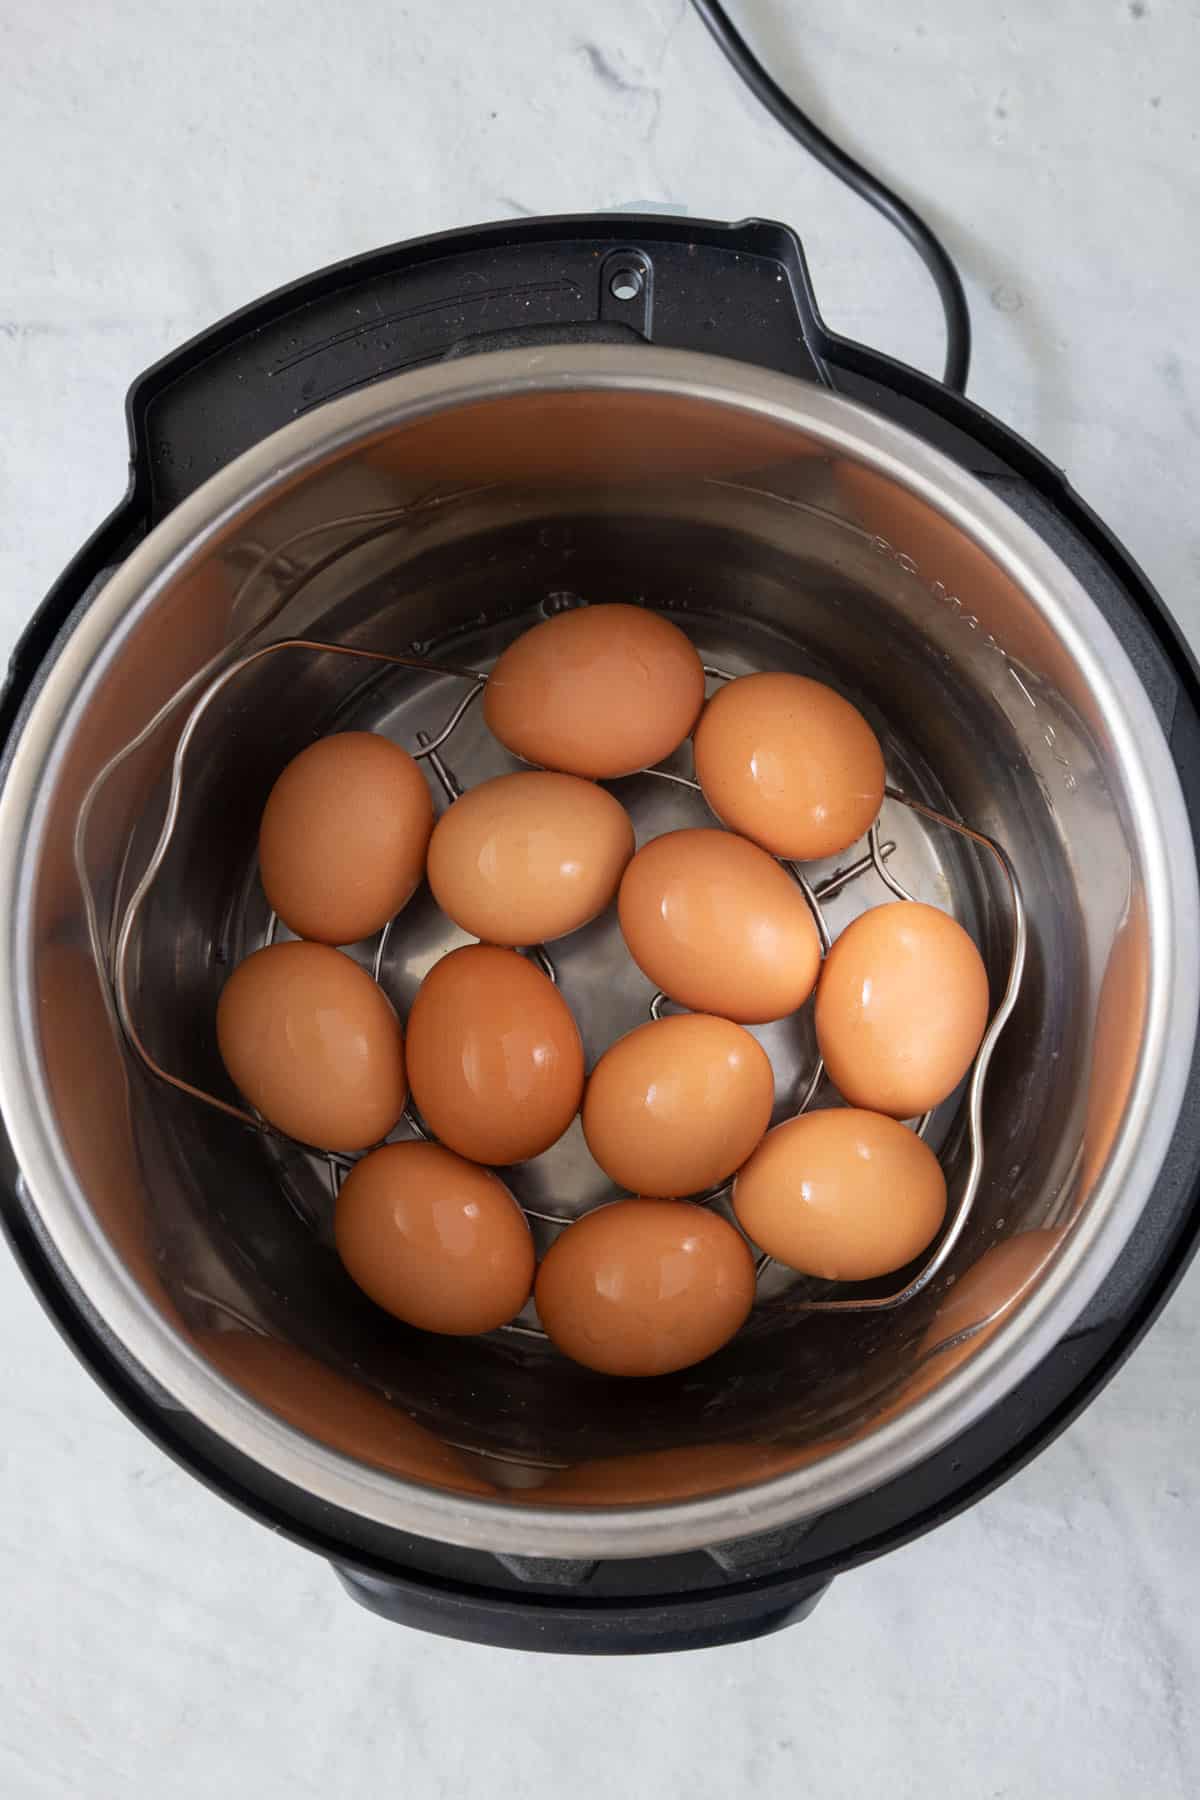 Instant pot with water, steam rack and 12 eggs before cooking.